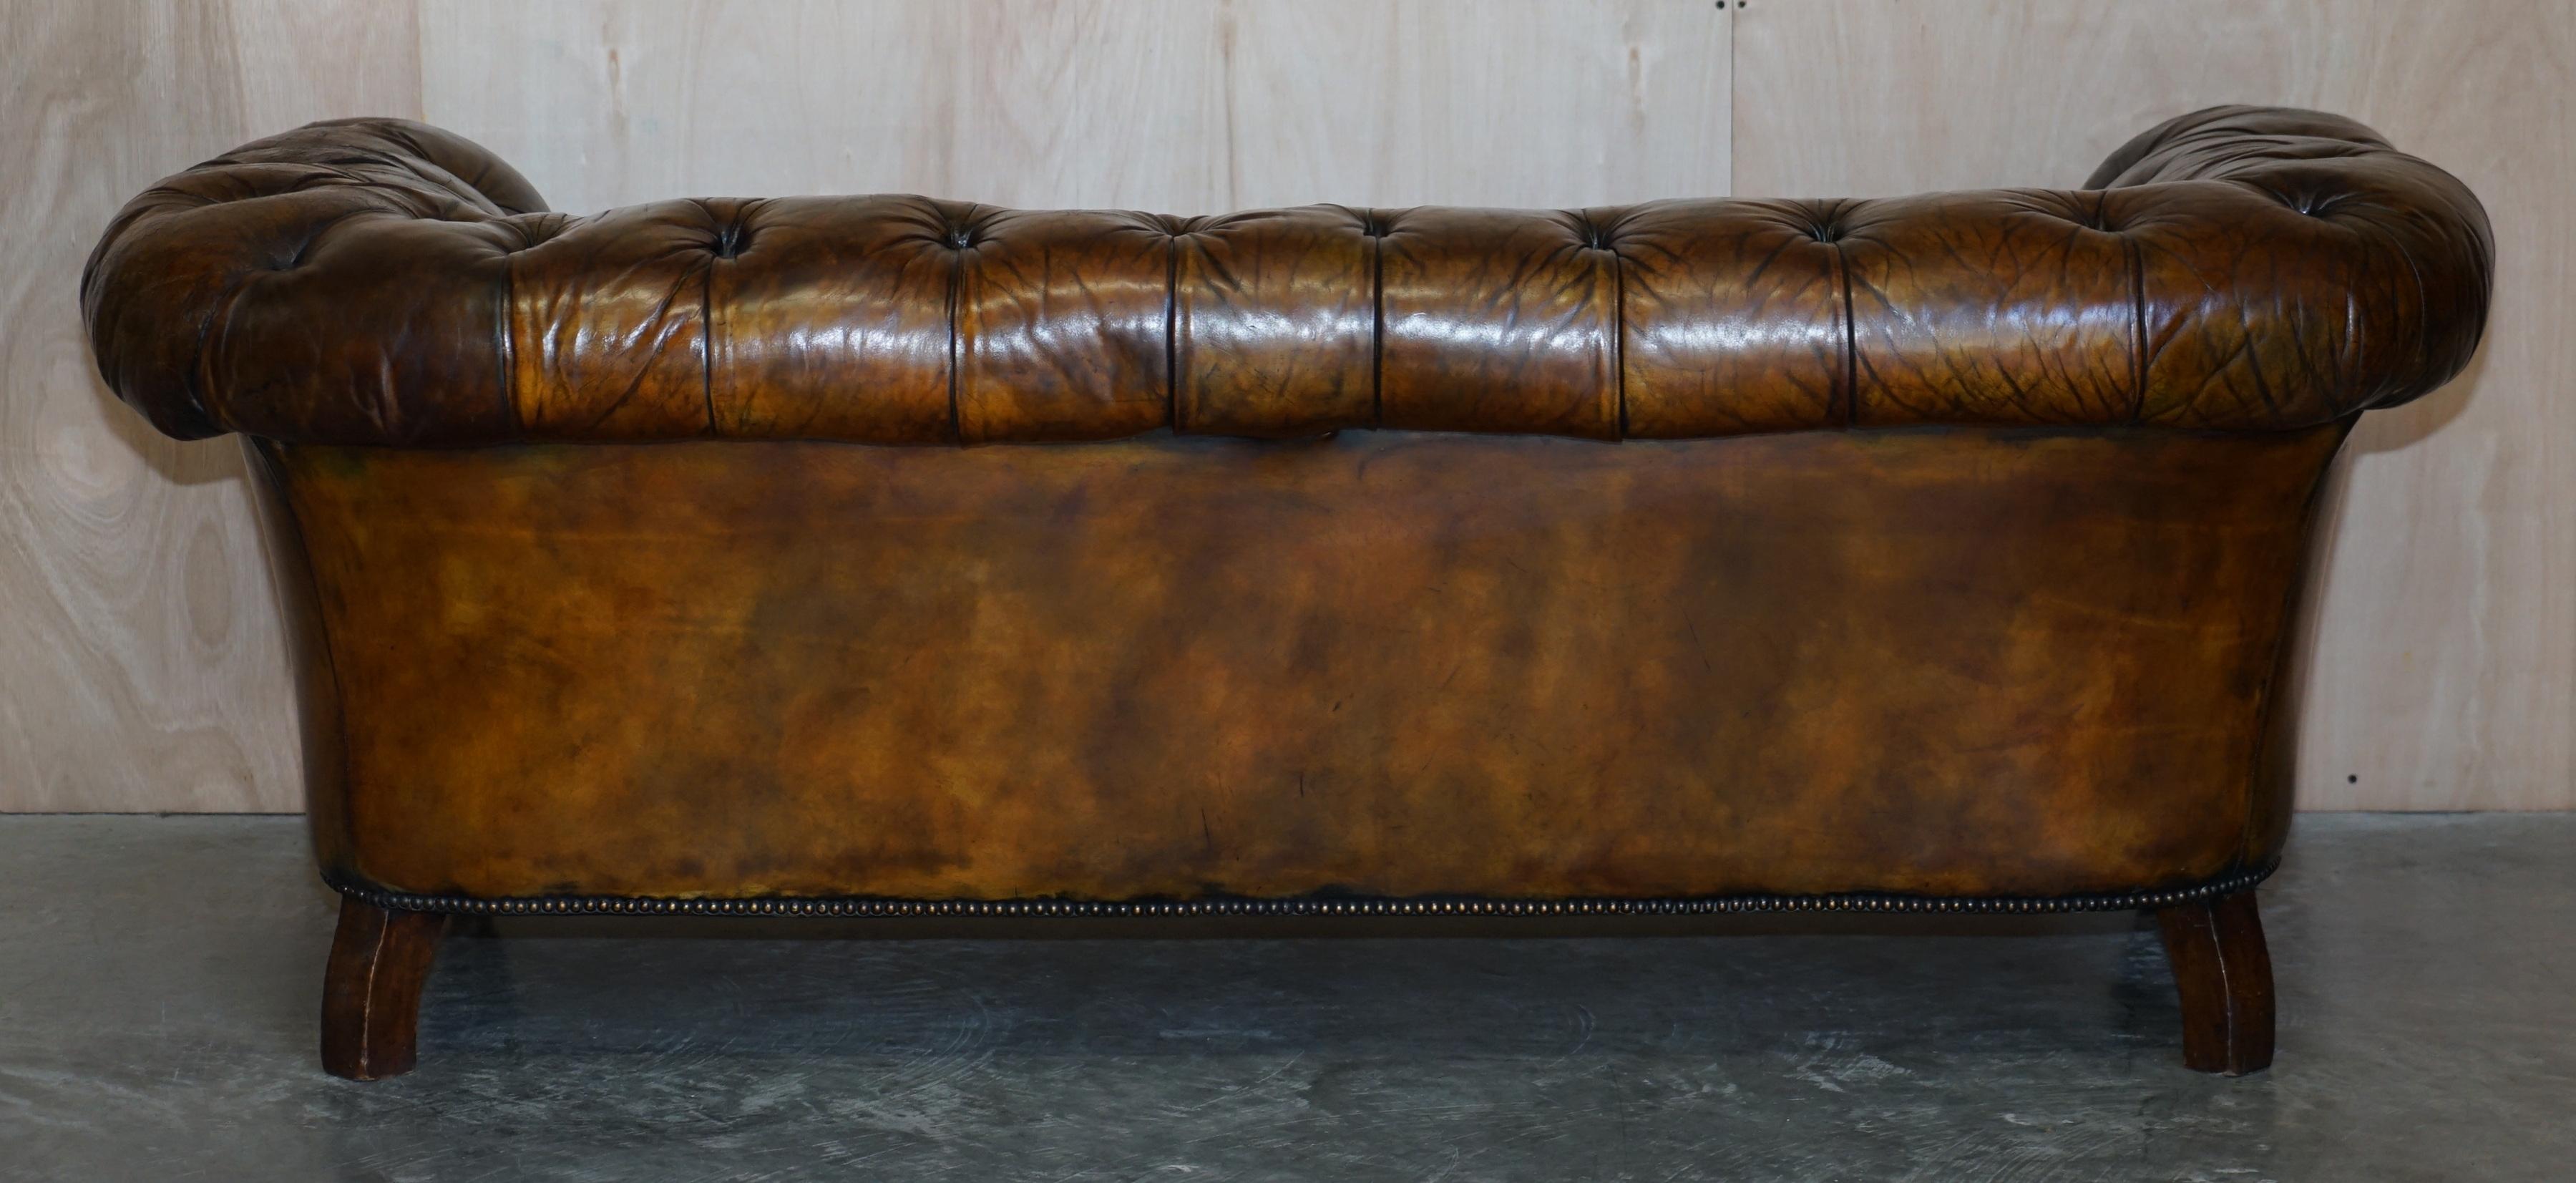 Antique Victorian Chesterfield Tufted Brown Leather Sofa Feather Filled Cushions For Sale 11